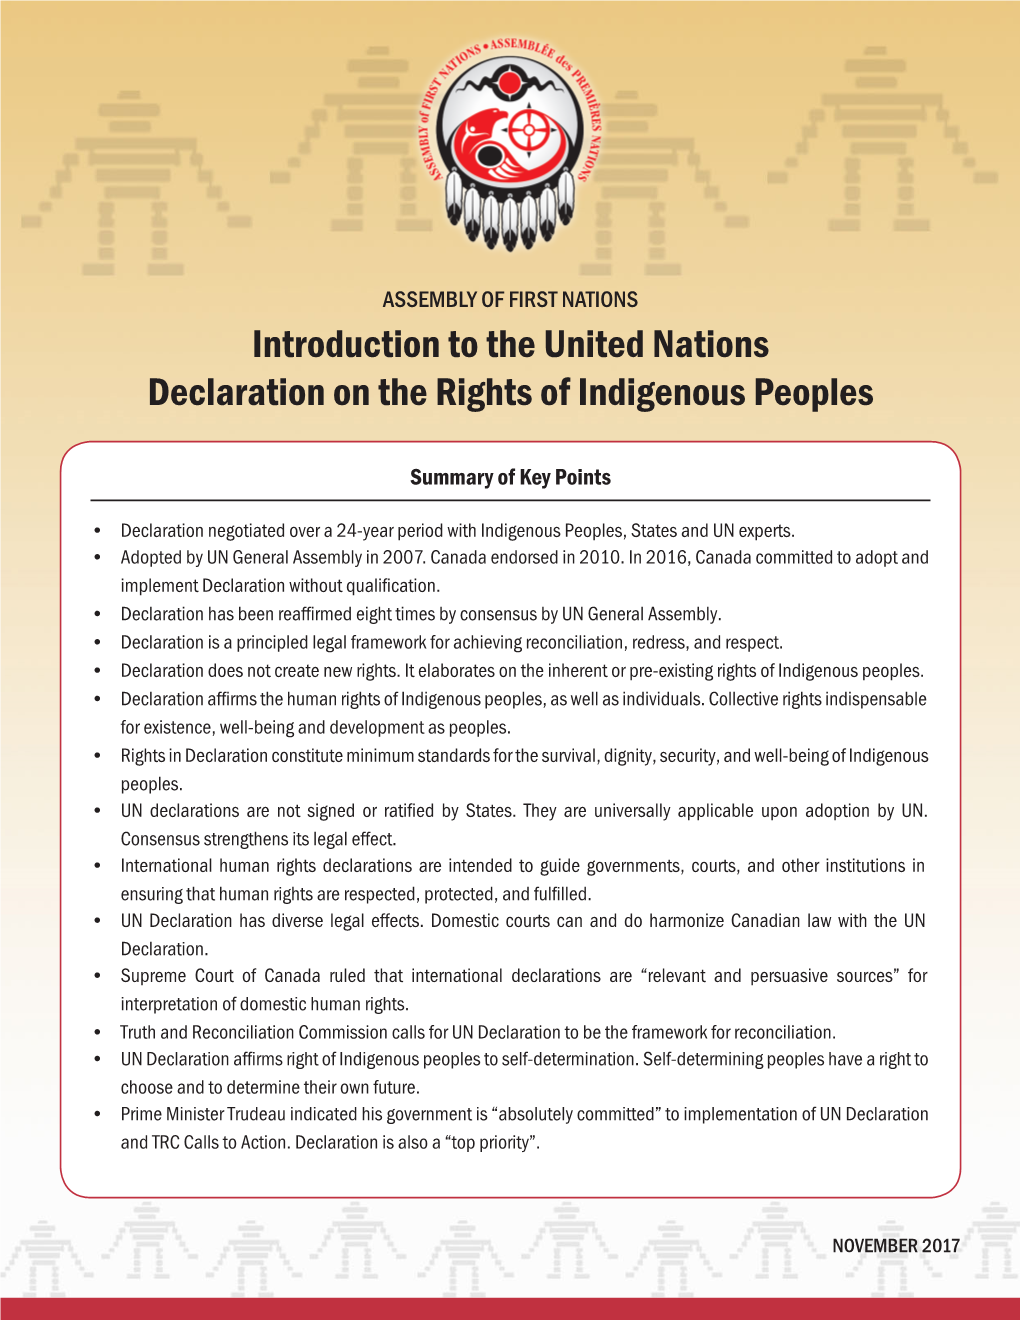 Introduction to the United Nations Declaration on the Rights of Indigenous Peoples